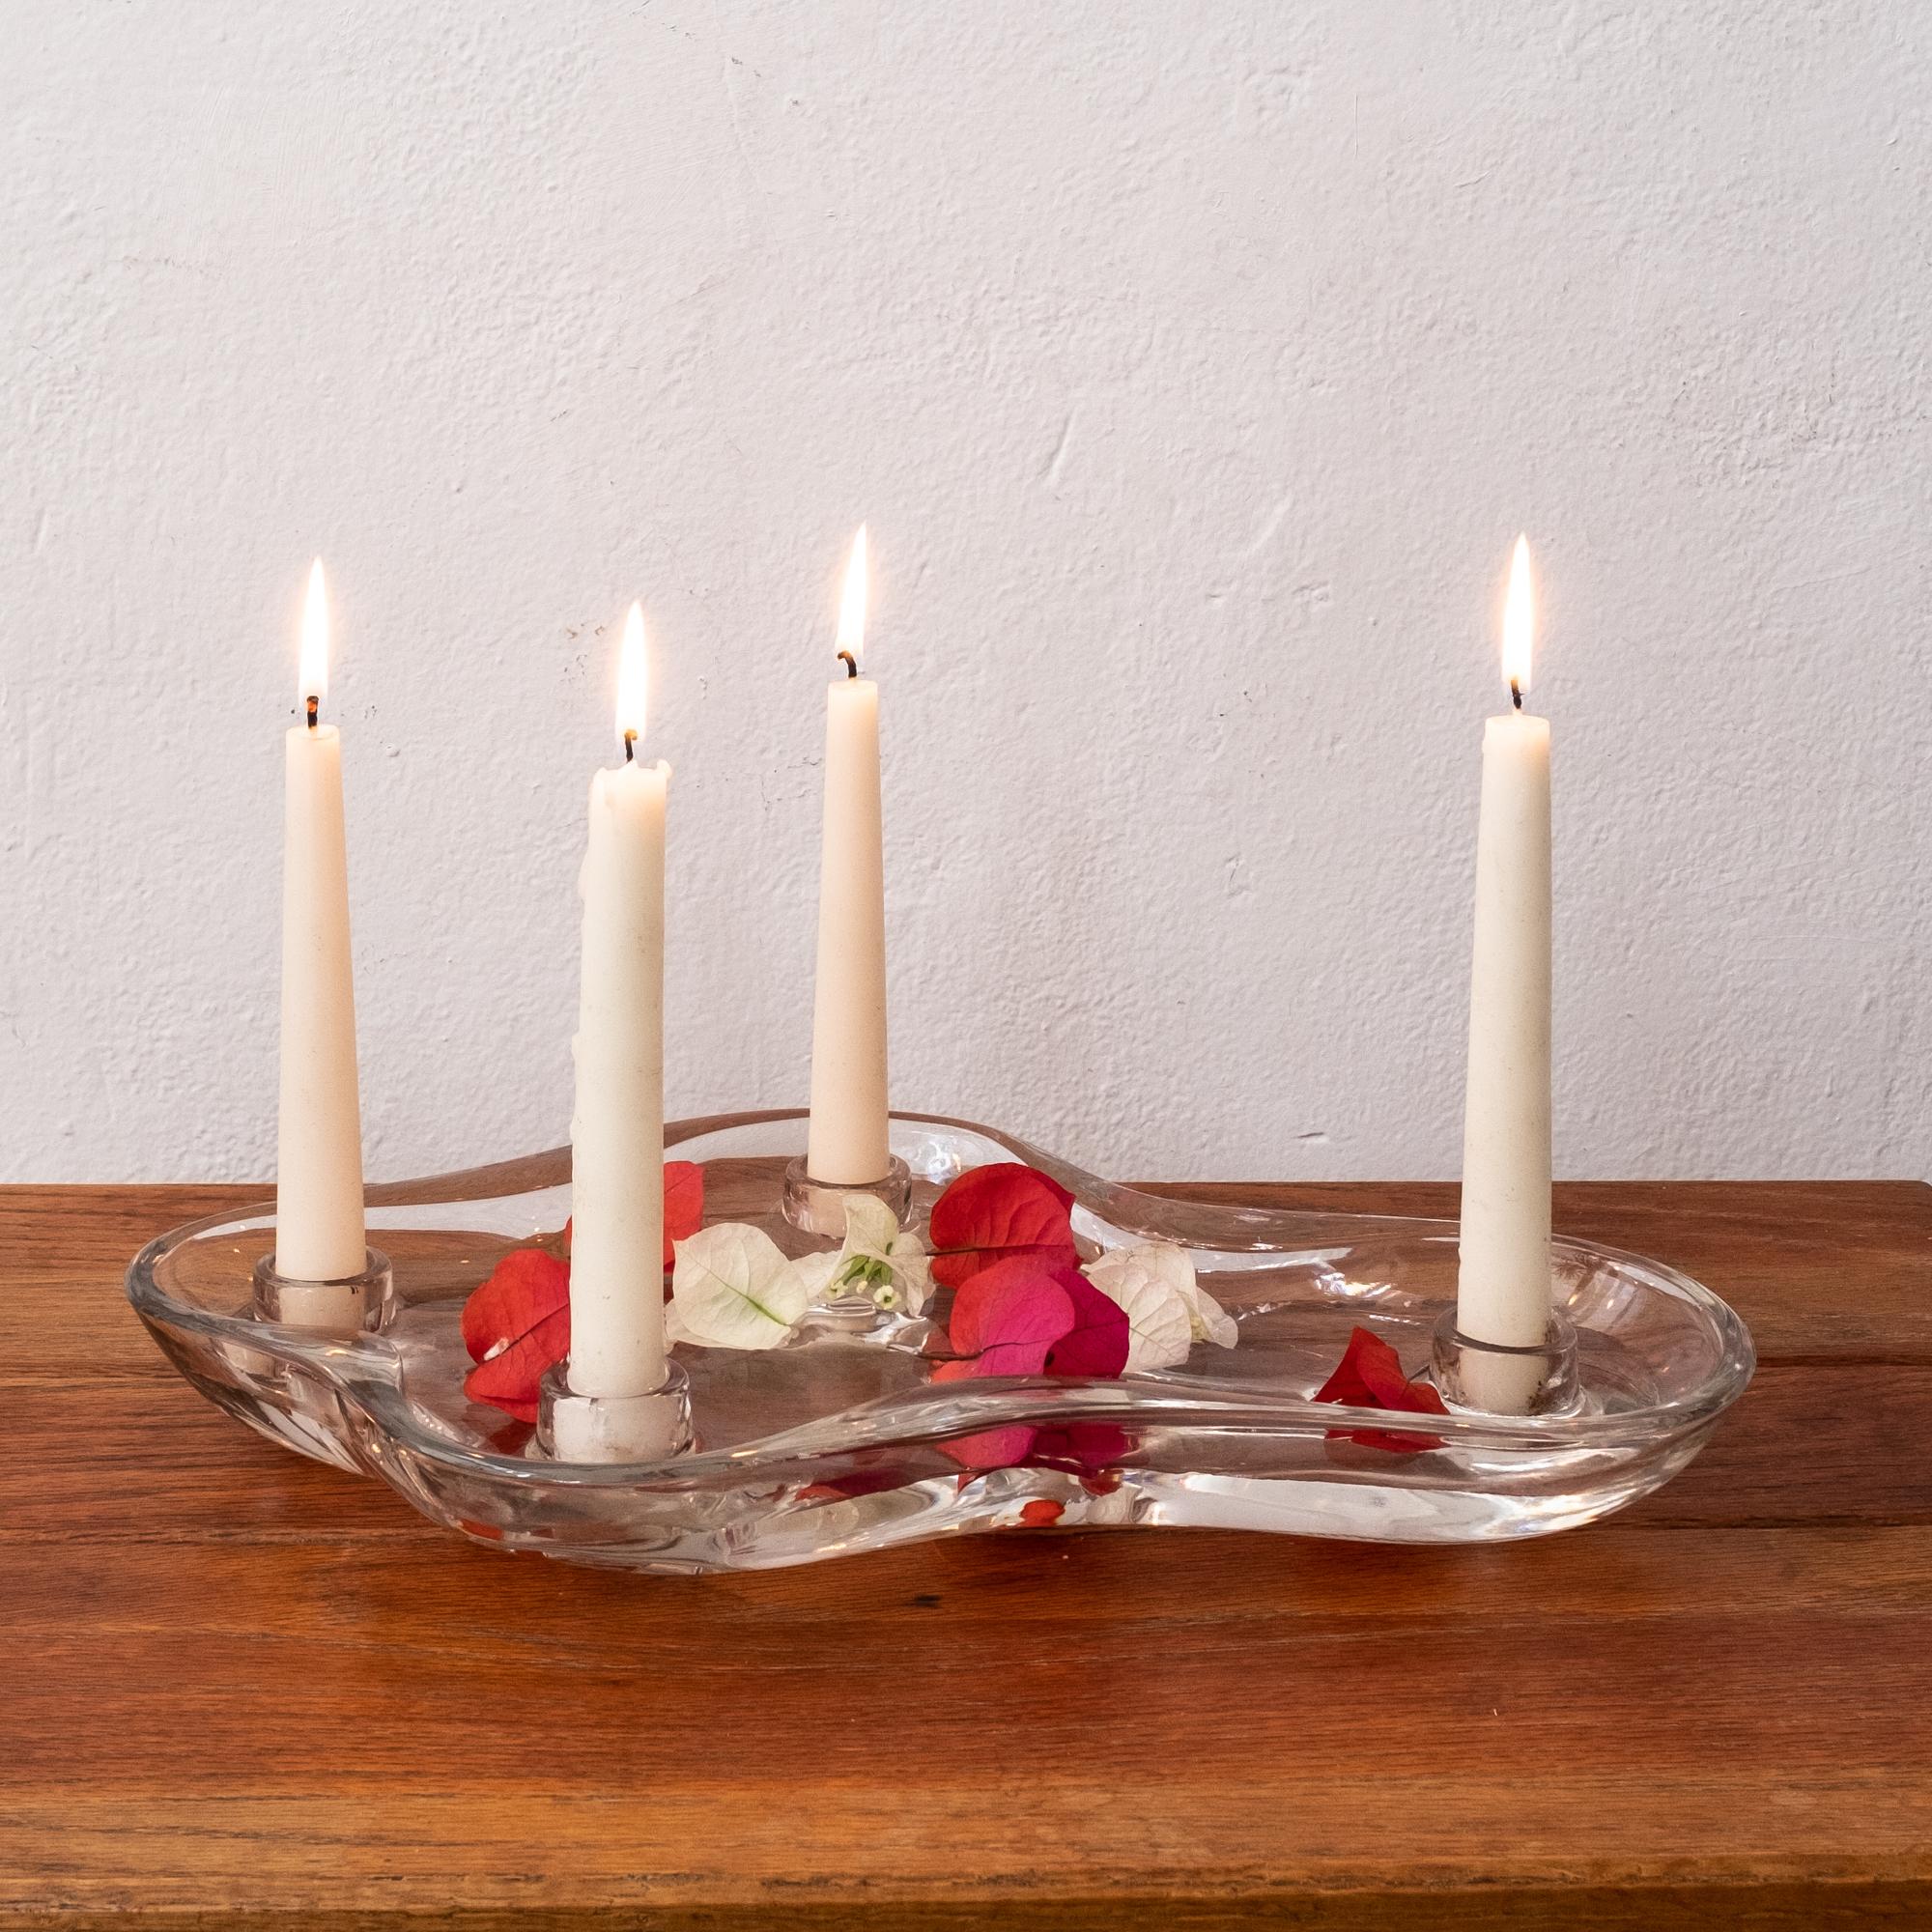 Flower Floater candleholder designed by Eva Lisa (Pipsan) Saarinen Swanson and manufactured by U.S. Glass Company in 1948. 

Eva Lisa (Pipsan) Saarinen Swanson is part of an influential design family. Her father was the architect and designer